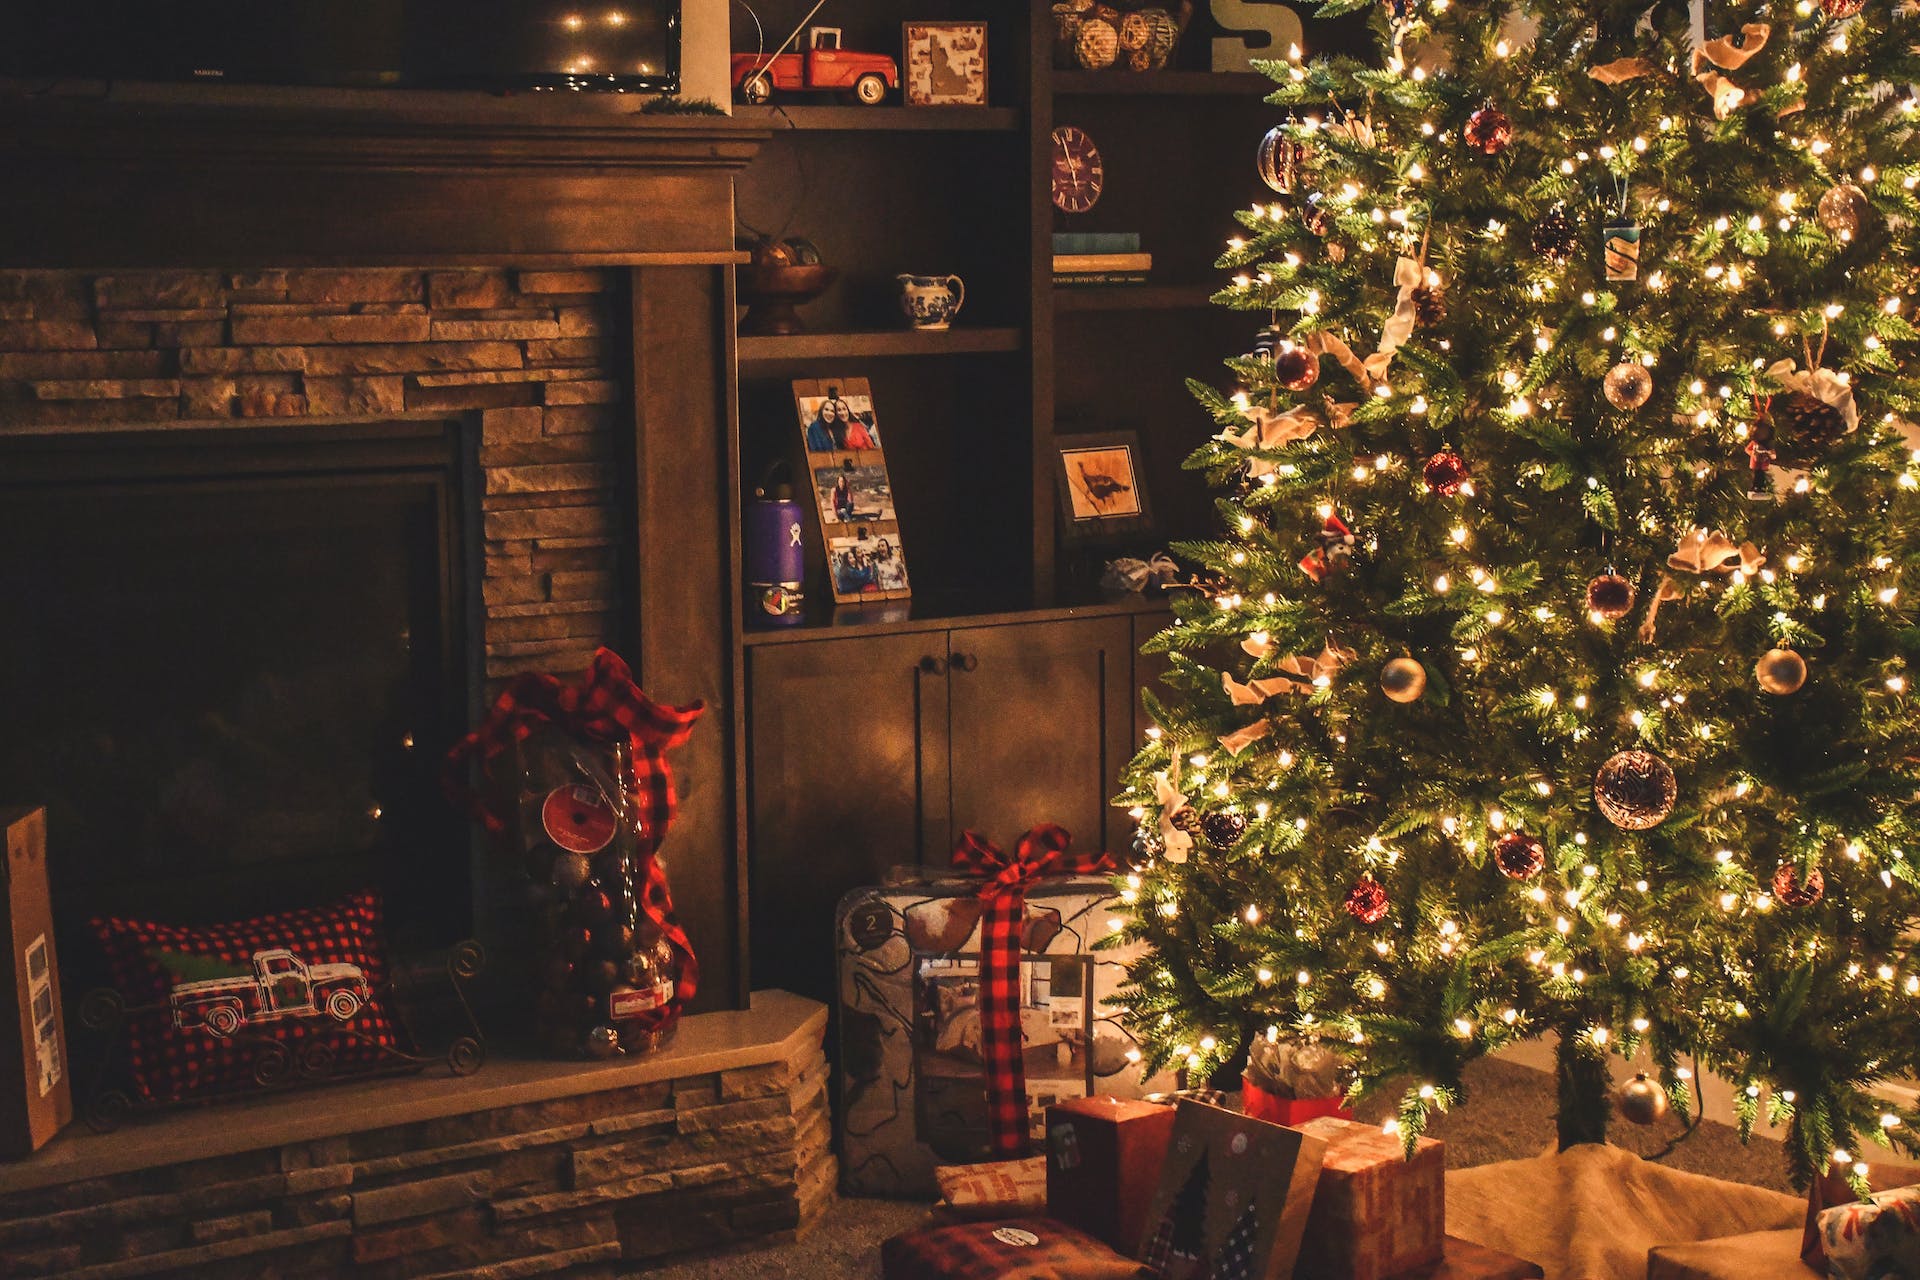 Christmas tree with presents. | Source: Pexels